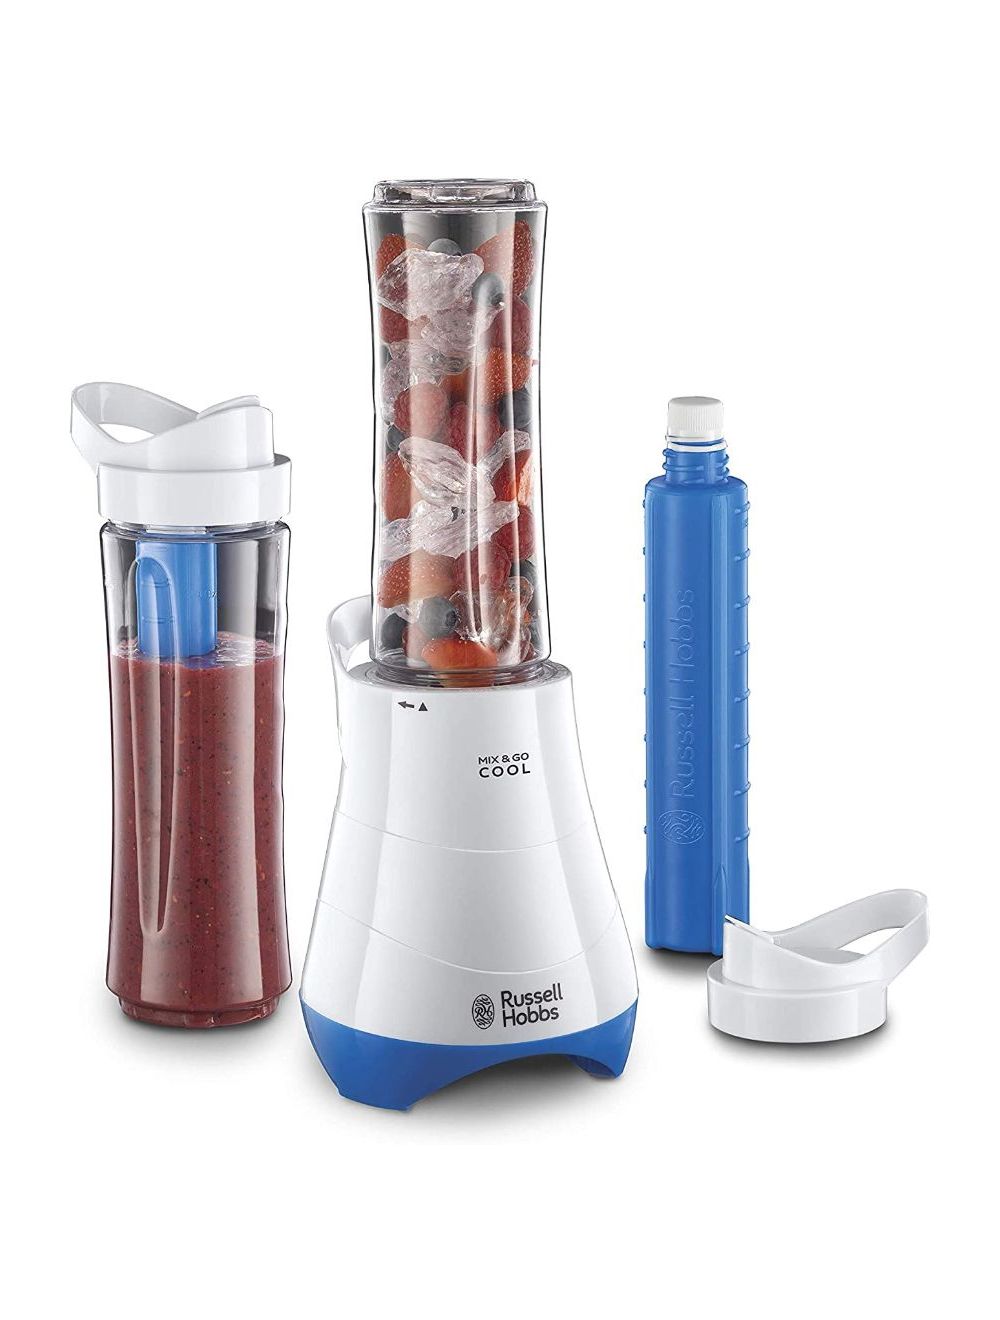 Russell Hobbs Mix and Go Cool Smoothie Maker-21351